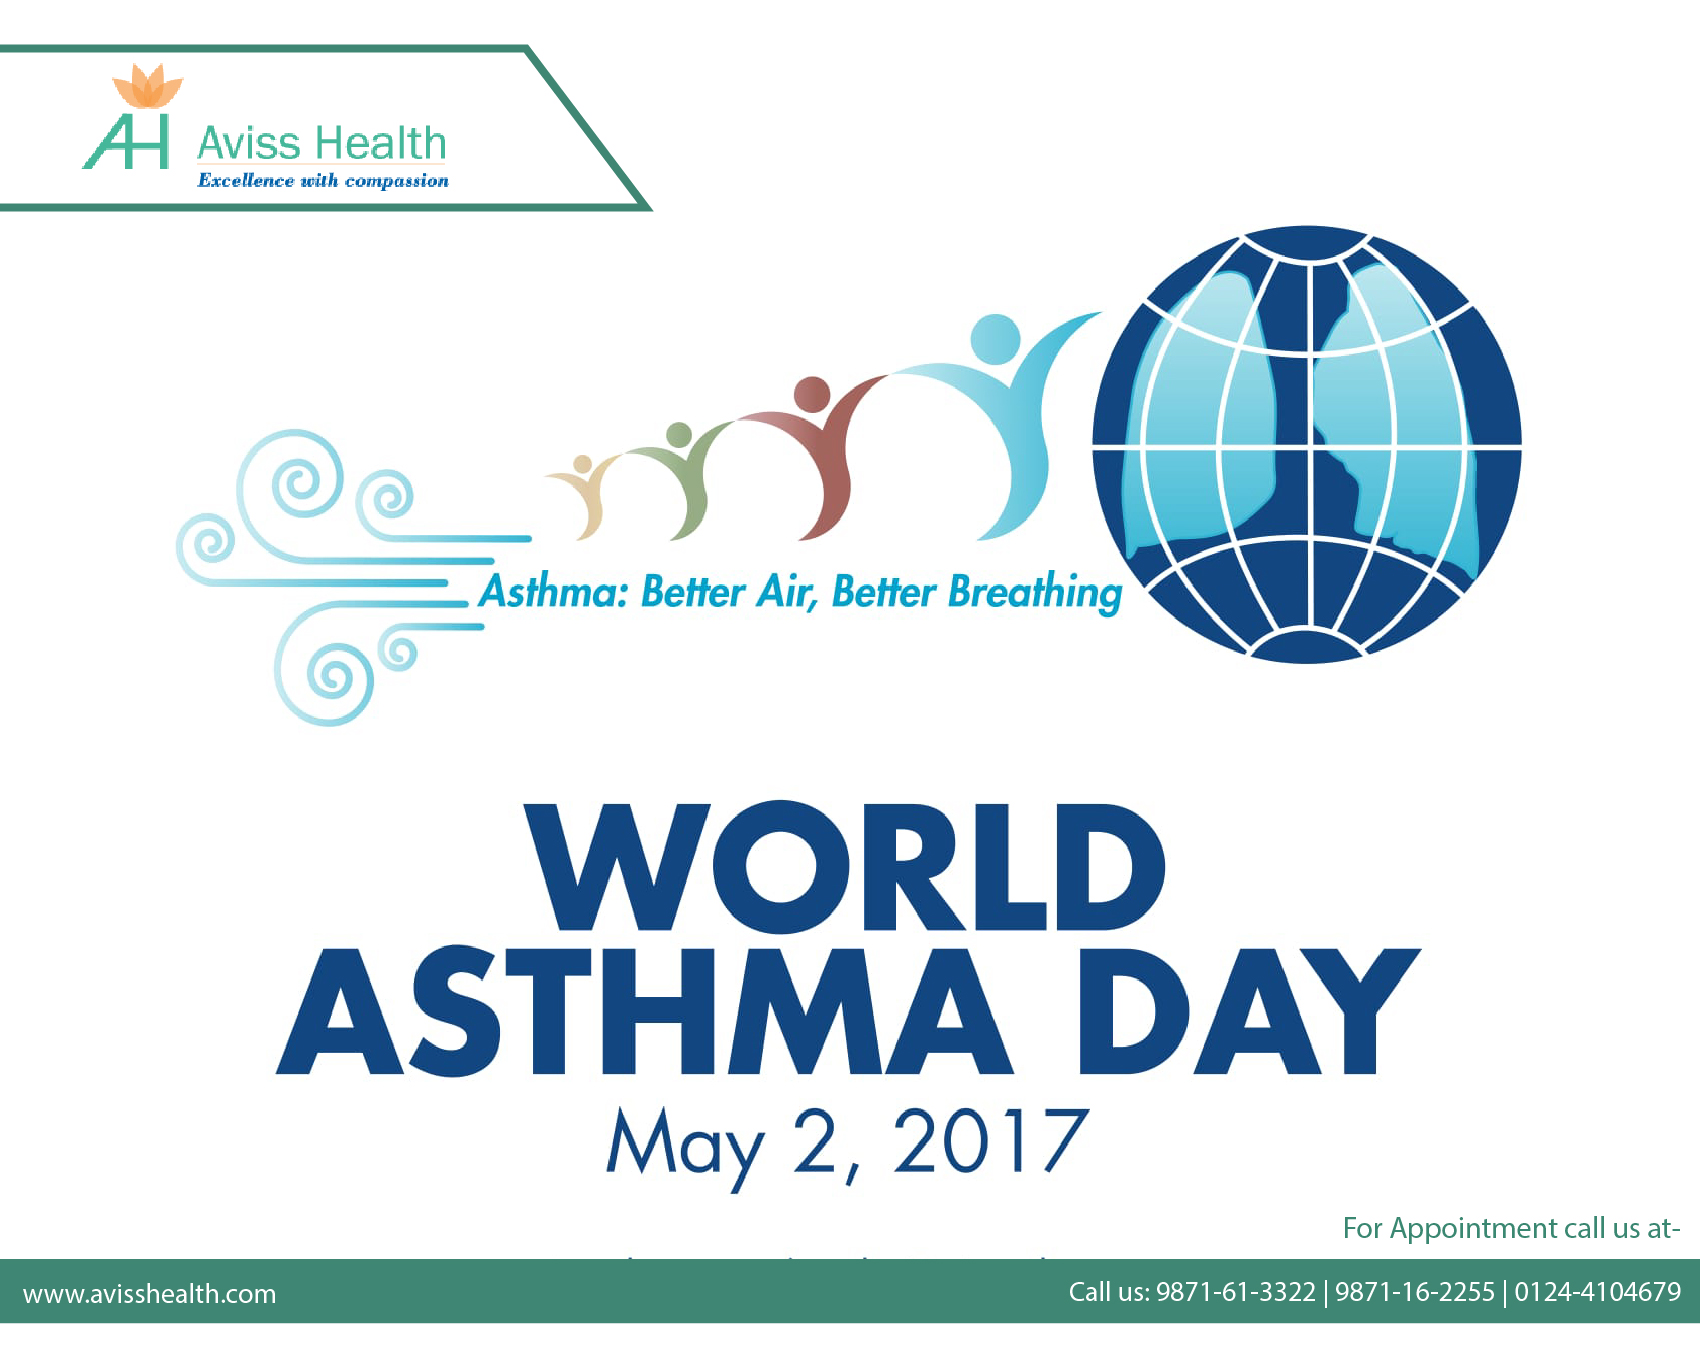 ASTHMA: WHAT IT IS, ITS CAUSES, ITS SYMPTOMS, AND TREATMENT